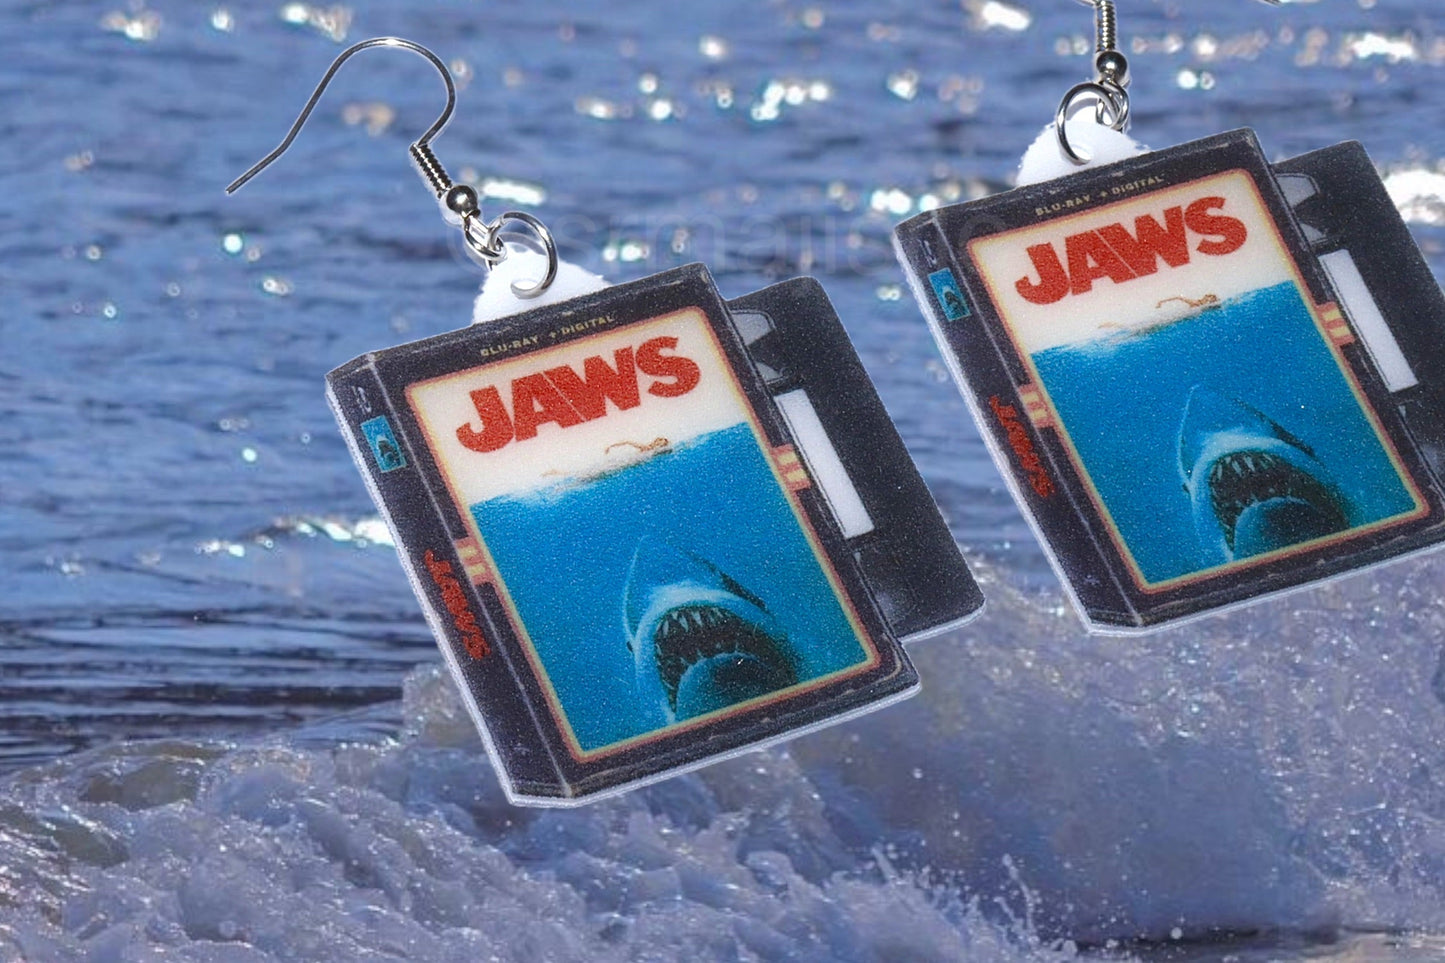 (READY TO SHIP) Jaws (1975) Movie VHS Tape 2D detailed Handmade Earrings!